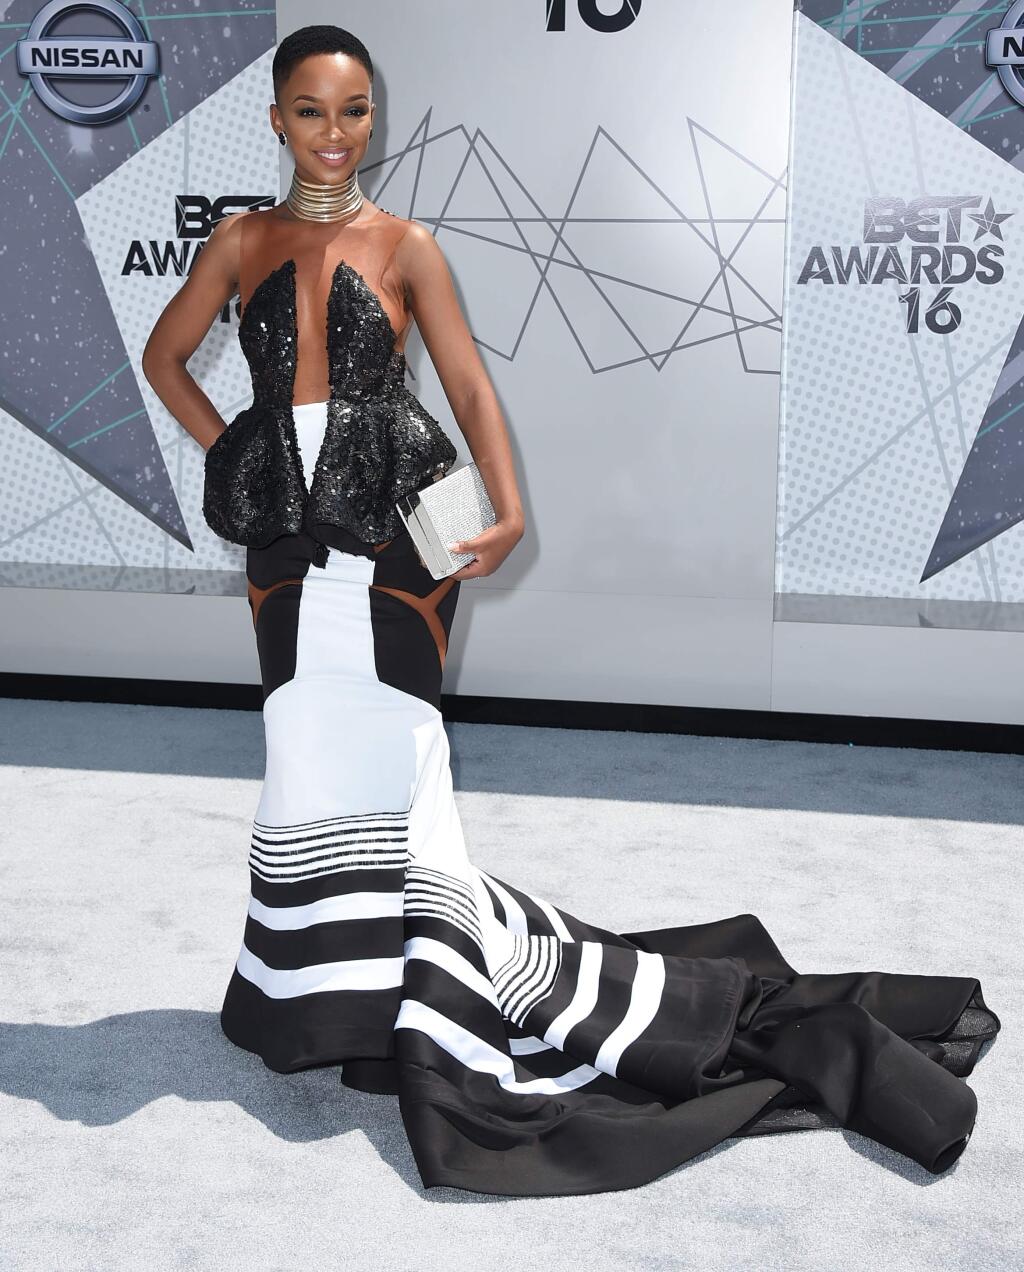 Nandi Mngoma arrives at the BET Awards at the Microsoft Theater on Sunday, June 26, 2016, in Los Angeles. (Photo by Jordan Strauss/Invision/AP)